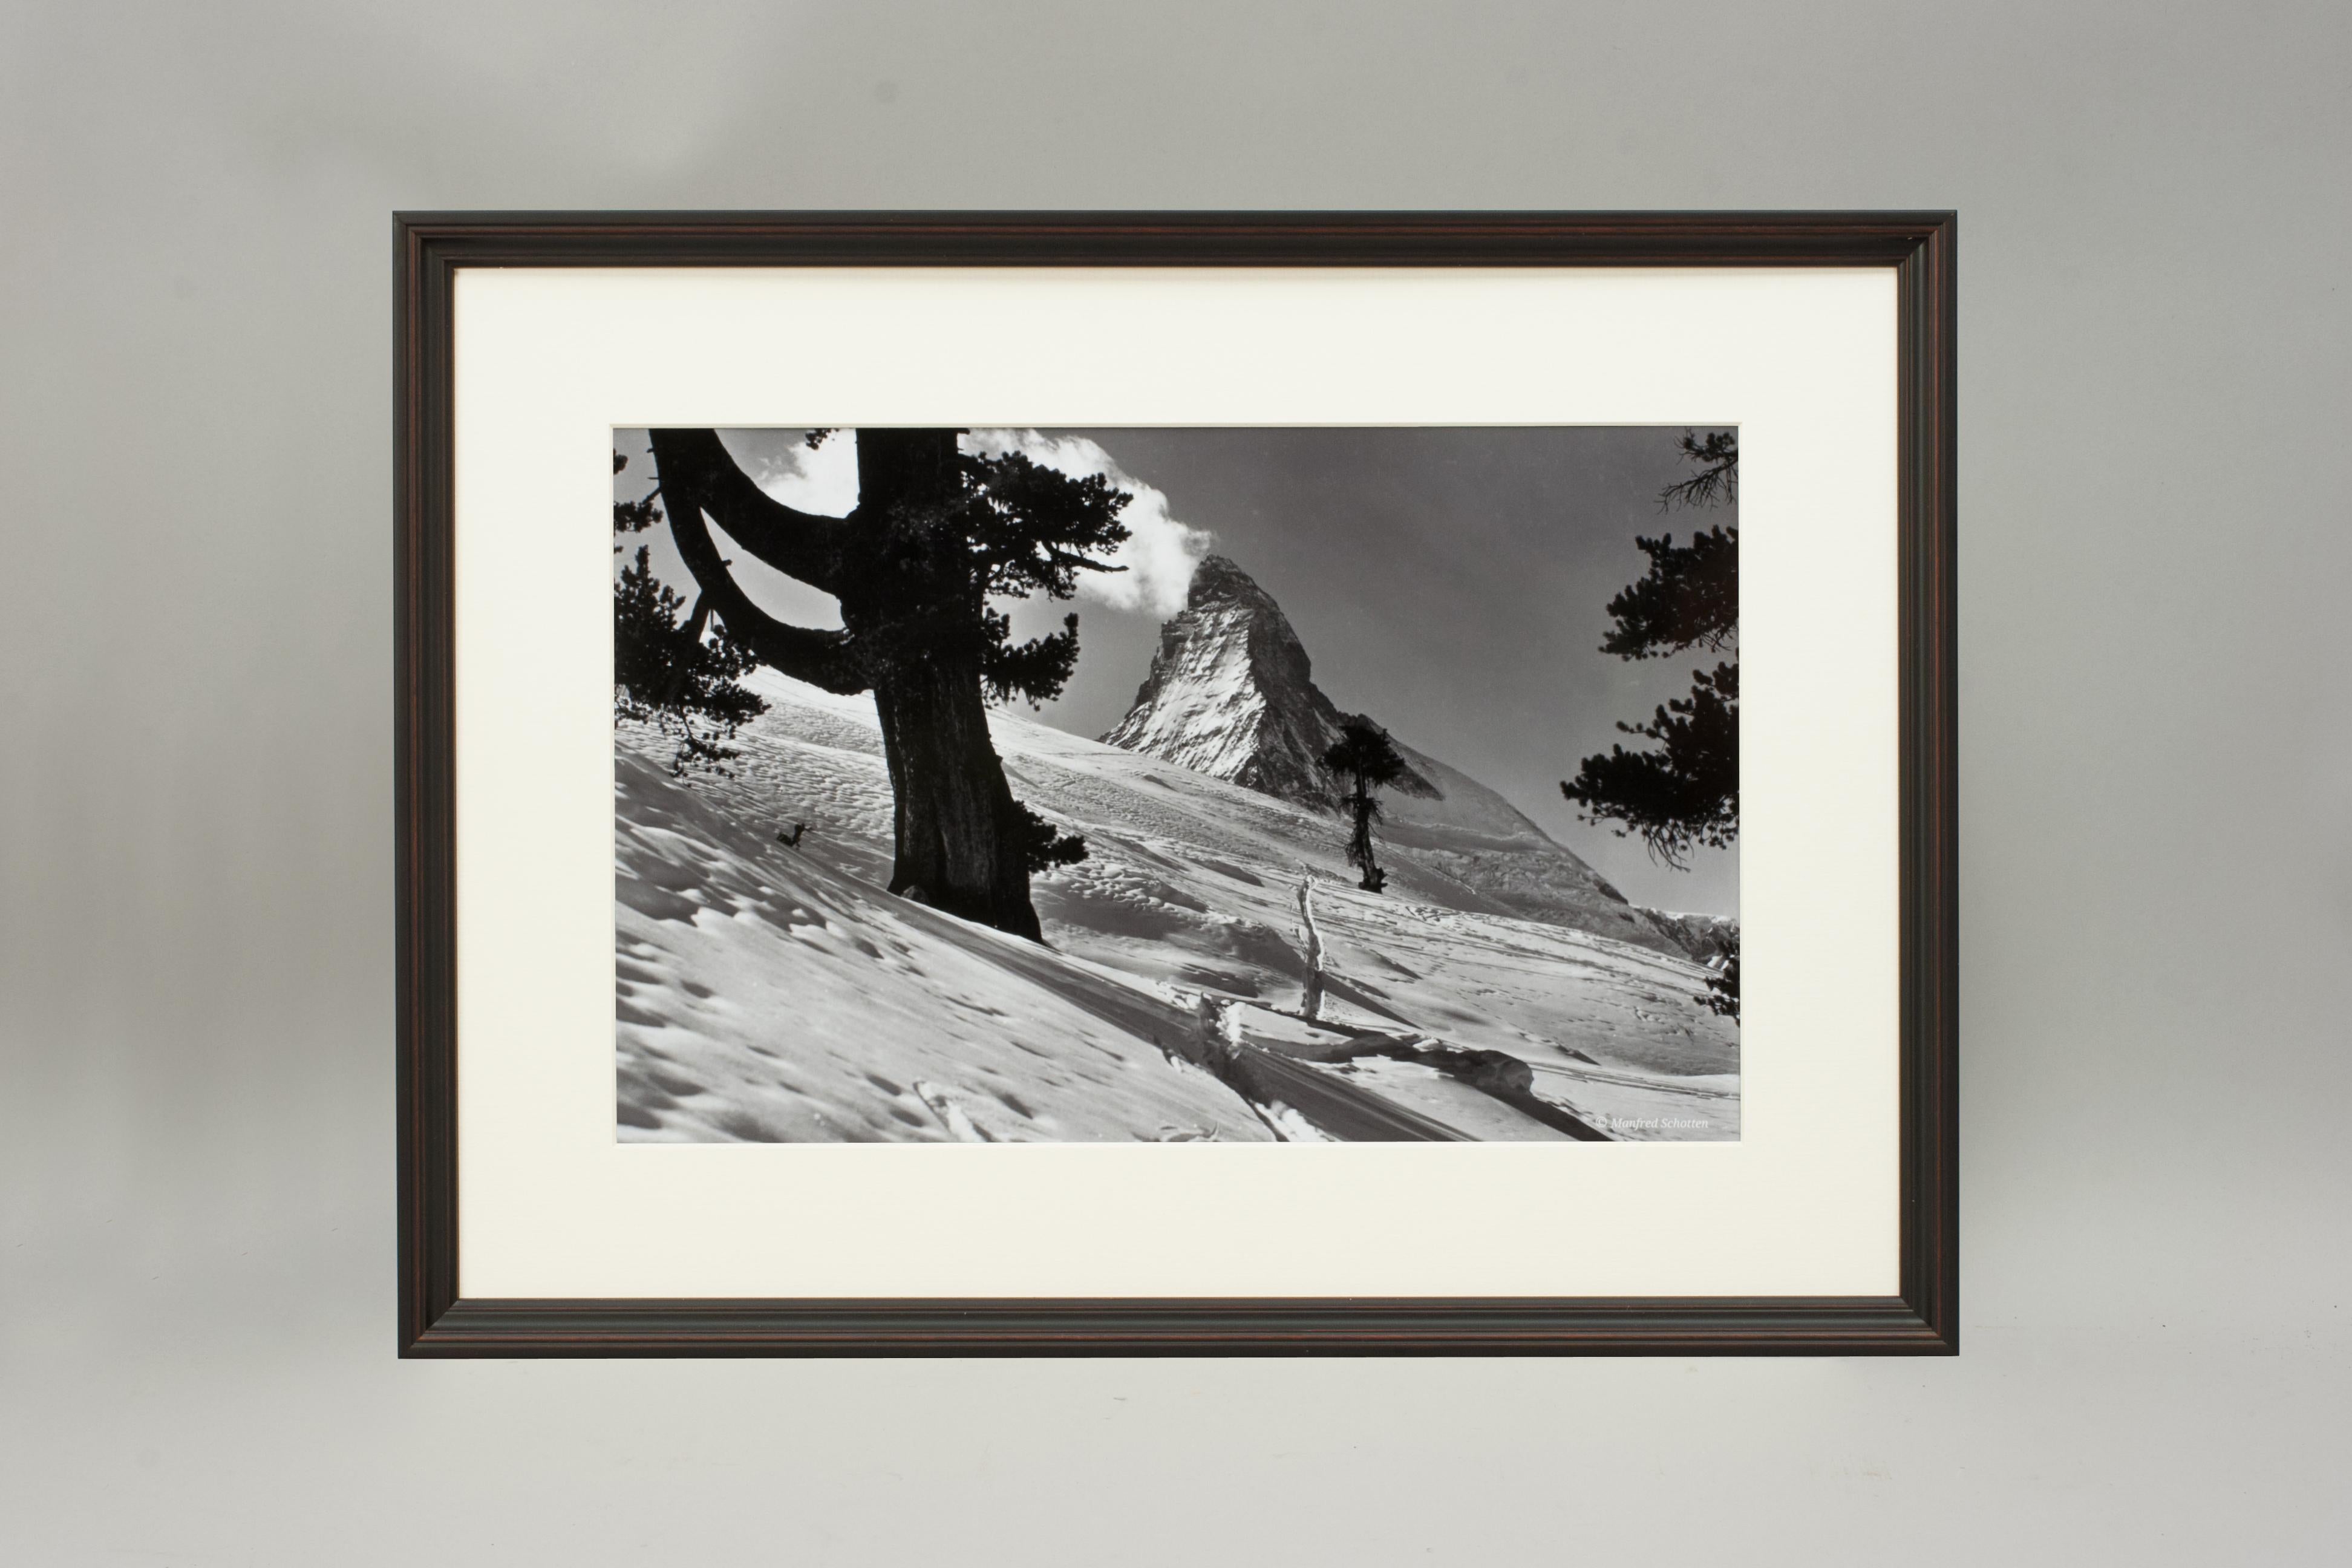 'MATTERHORN', a modern framed and mounted black and white photograph after an original 1930's skiing photograph. The frame is black with a burgundy undercoat, the glazing is clarity+ premium synthetic glass. Black & white alpine photos are the